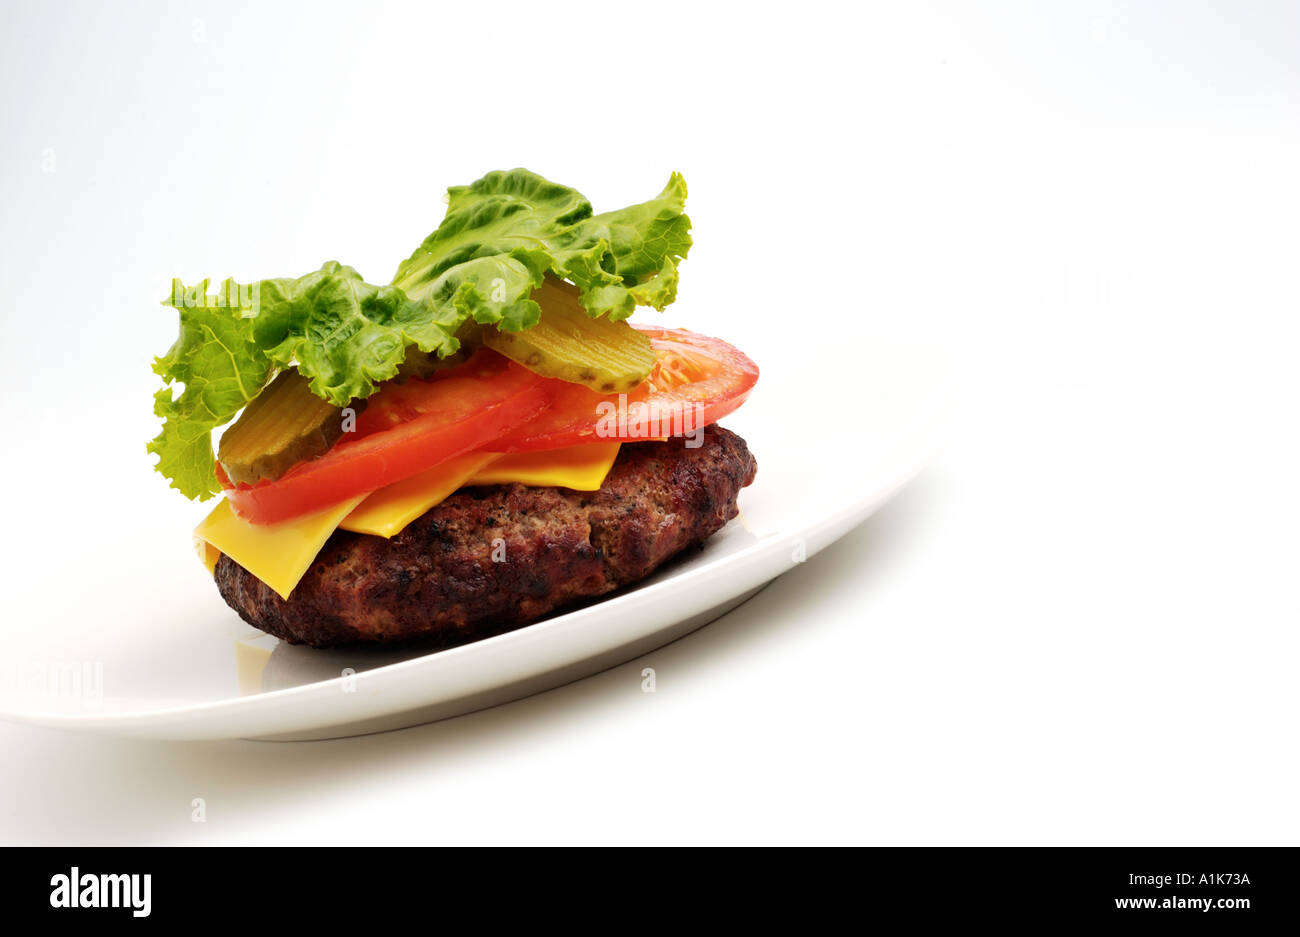 Low carbohydrate eating Hamburger with bun missing Stock Photo